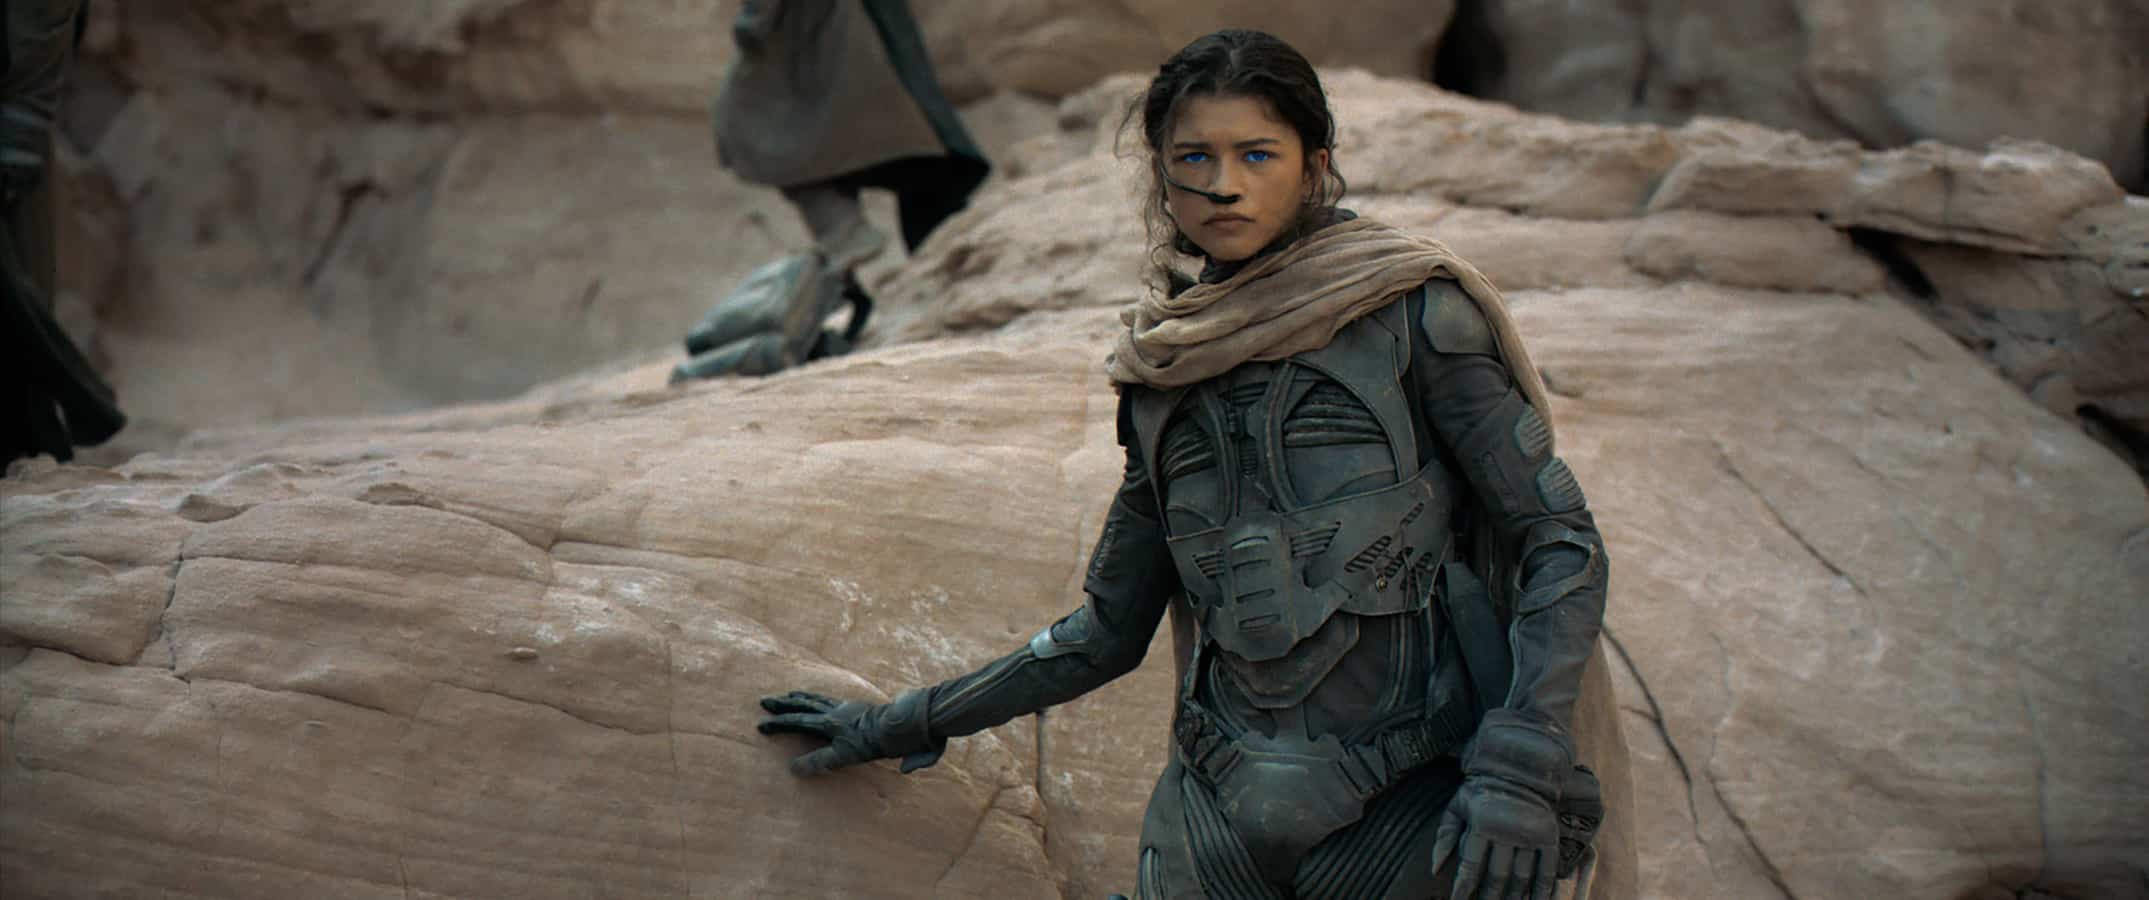 A girl leaning on a rock in sci-fi armor in this image from Legendary Pictures.